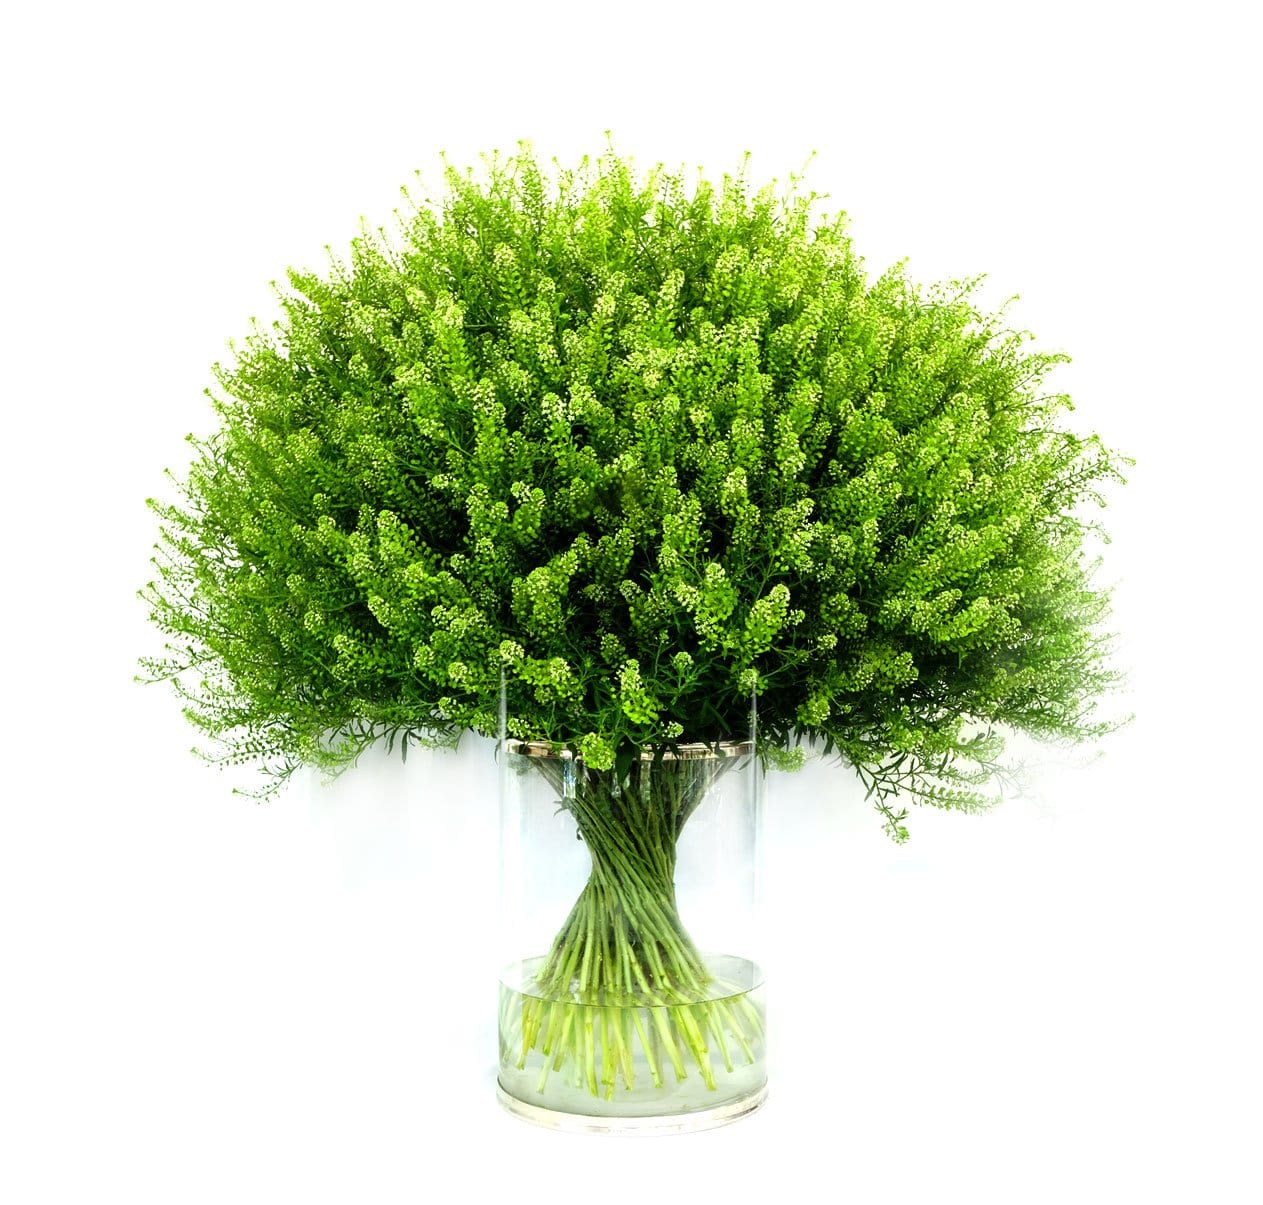 Thlaspi Green Bell  Wholesale Cut Flowers Direct